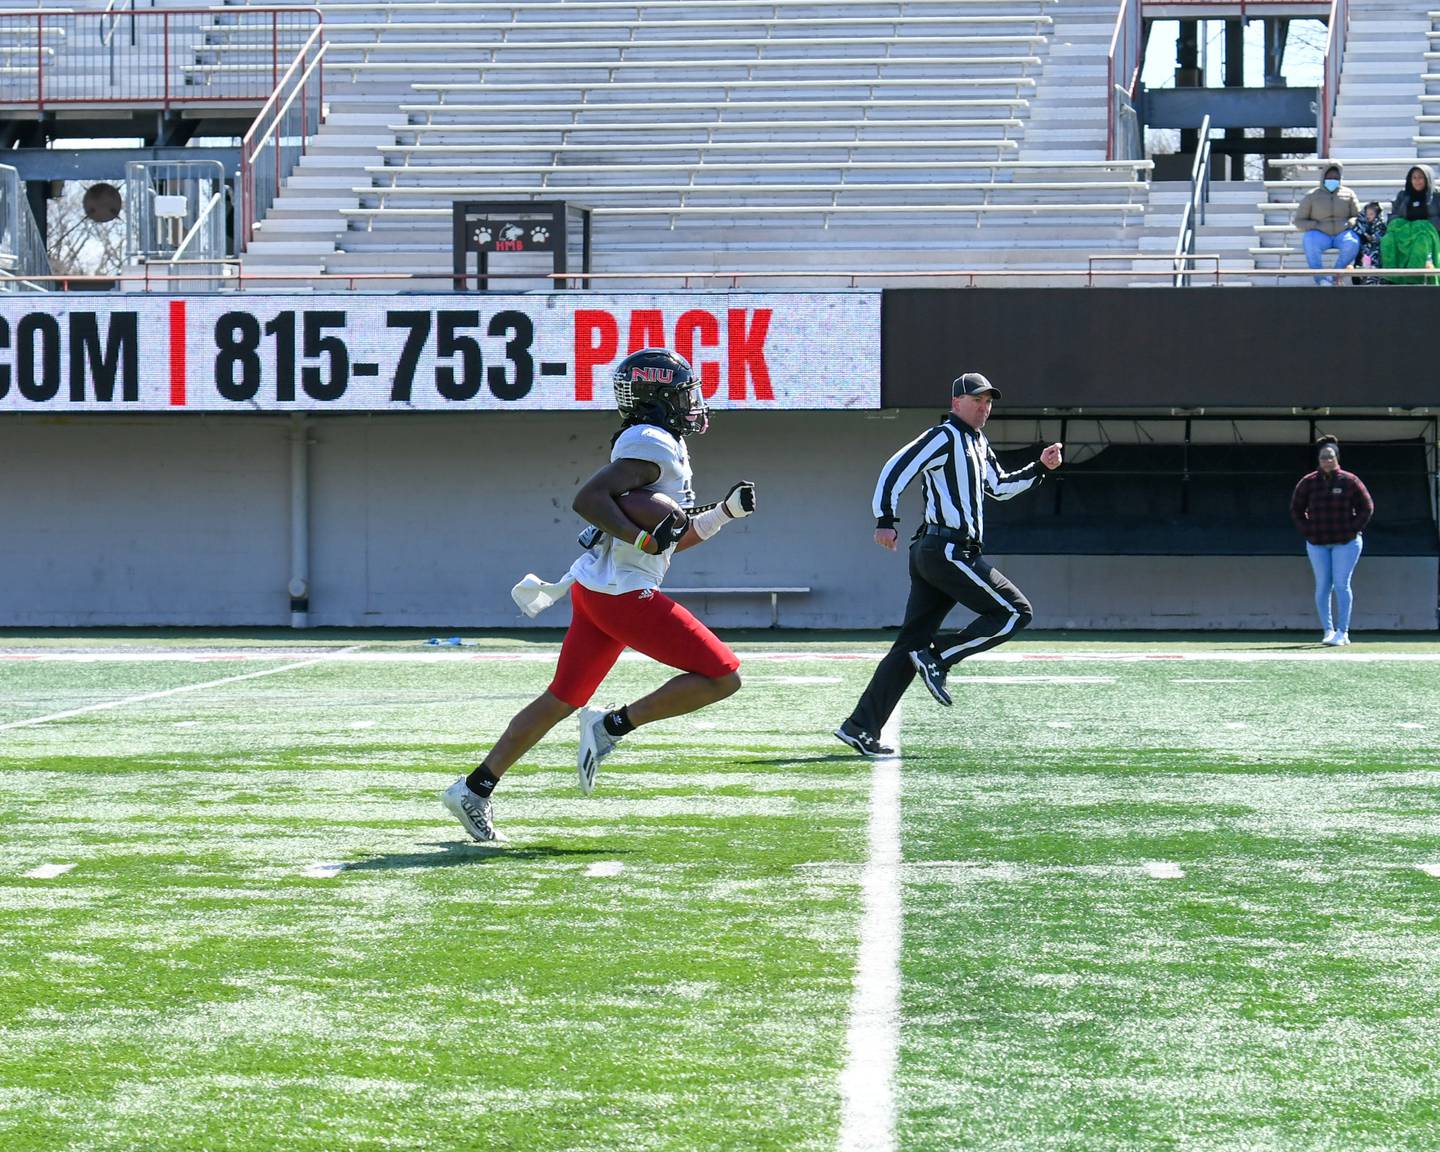 Northern Illinois University wide receiver Billy Dozier (10) runs. the ball in for a touchdown during the spring scrimmage at Huskie Stadium in DeKalb held on Saturday April 16th.